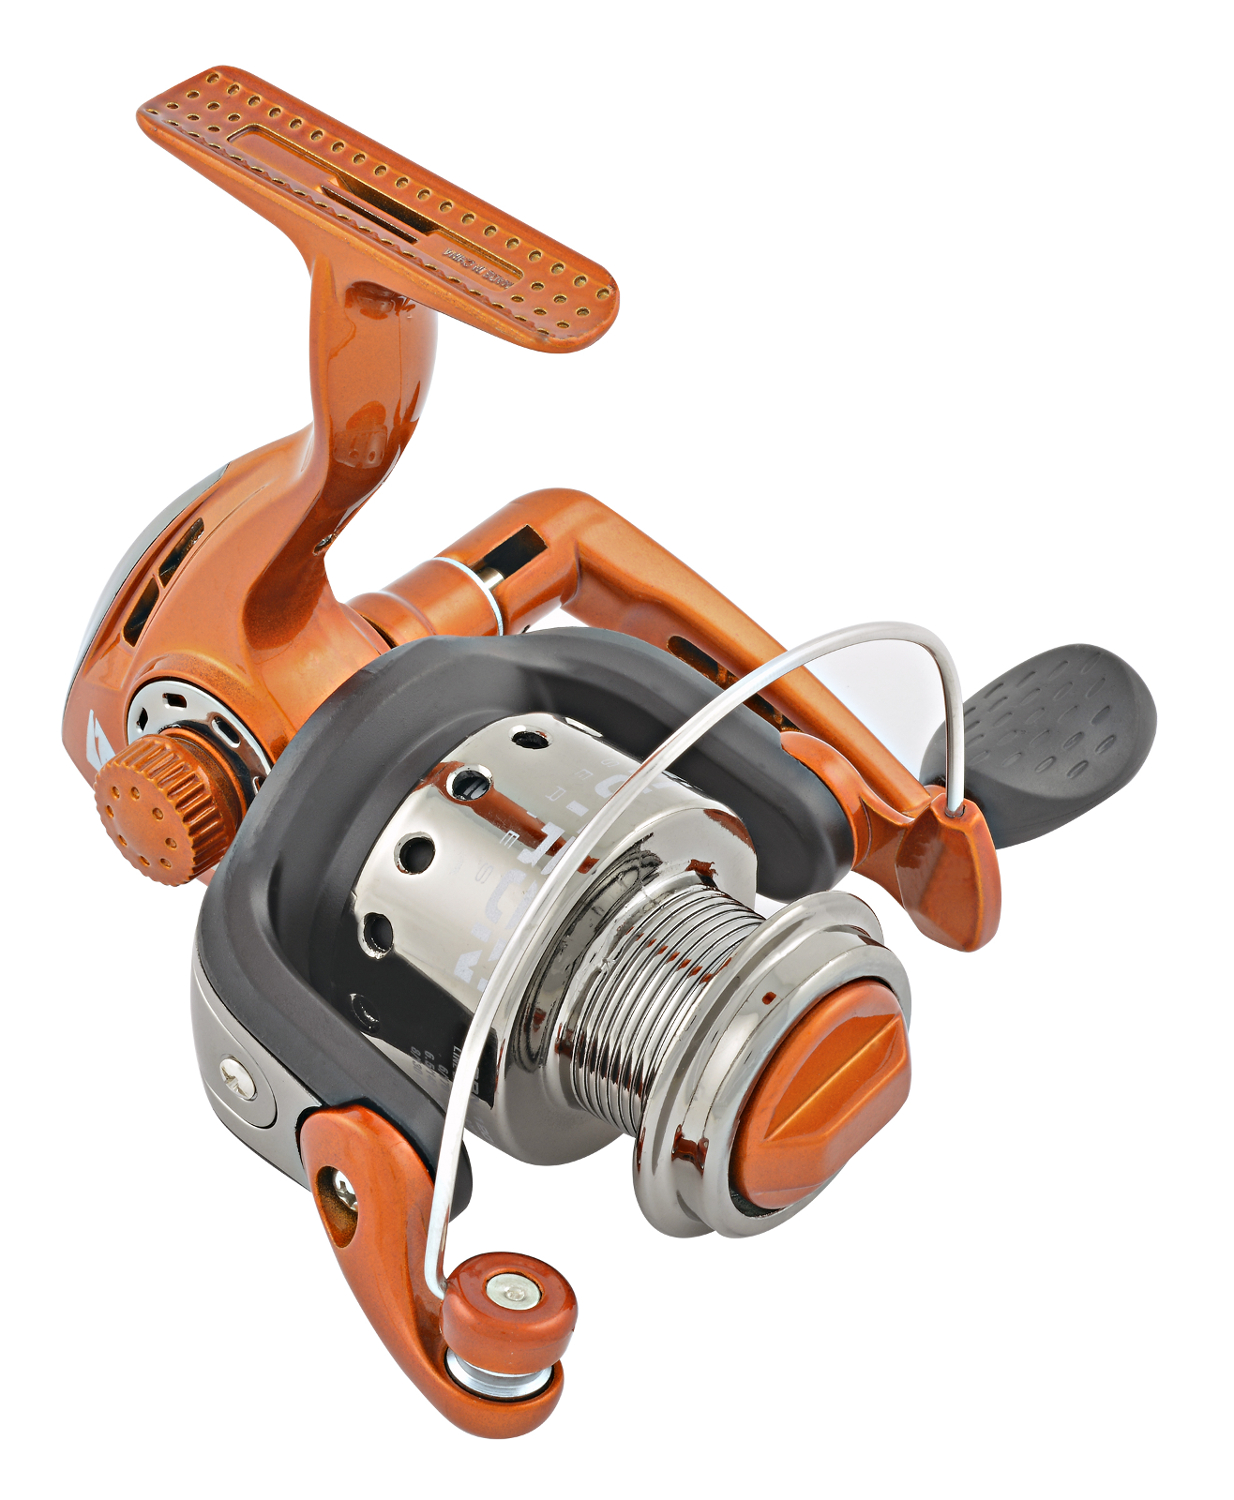 South Bend Neutron Spinning Reel - Size 40